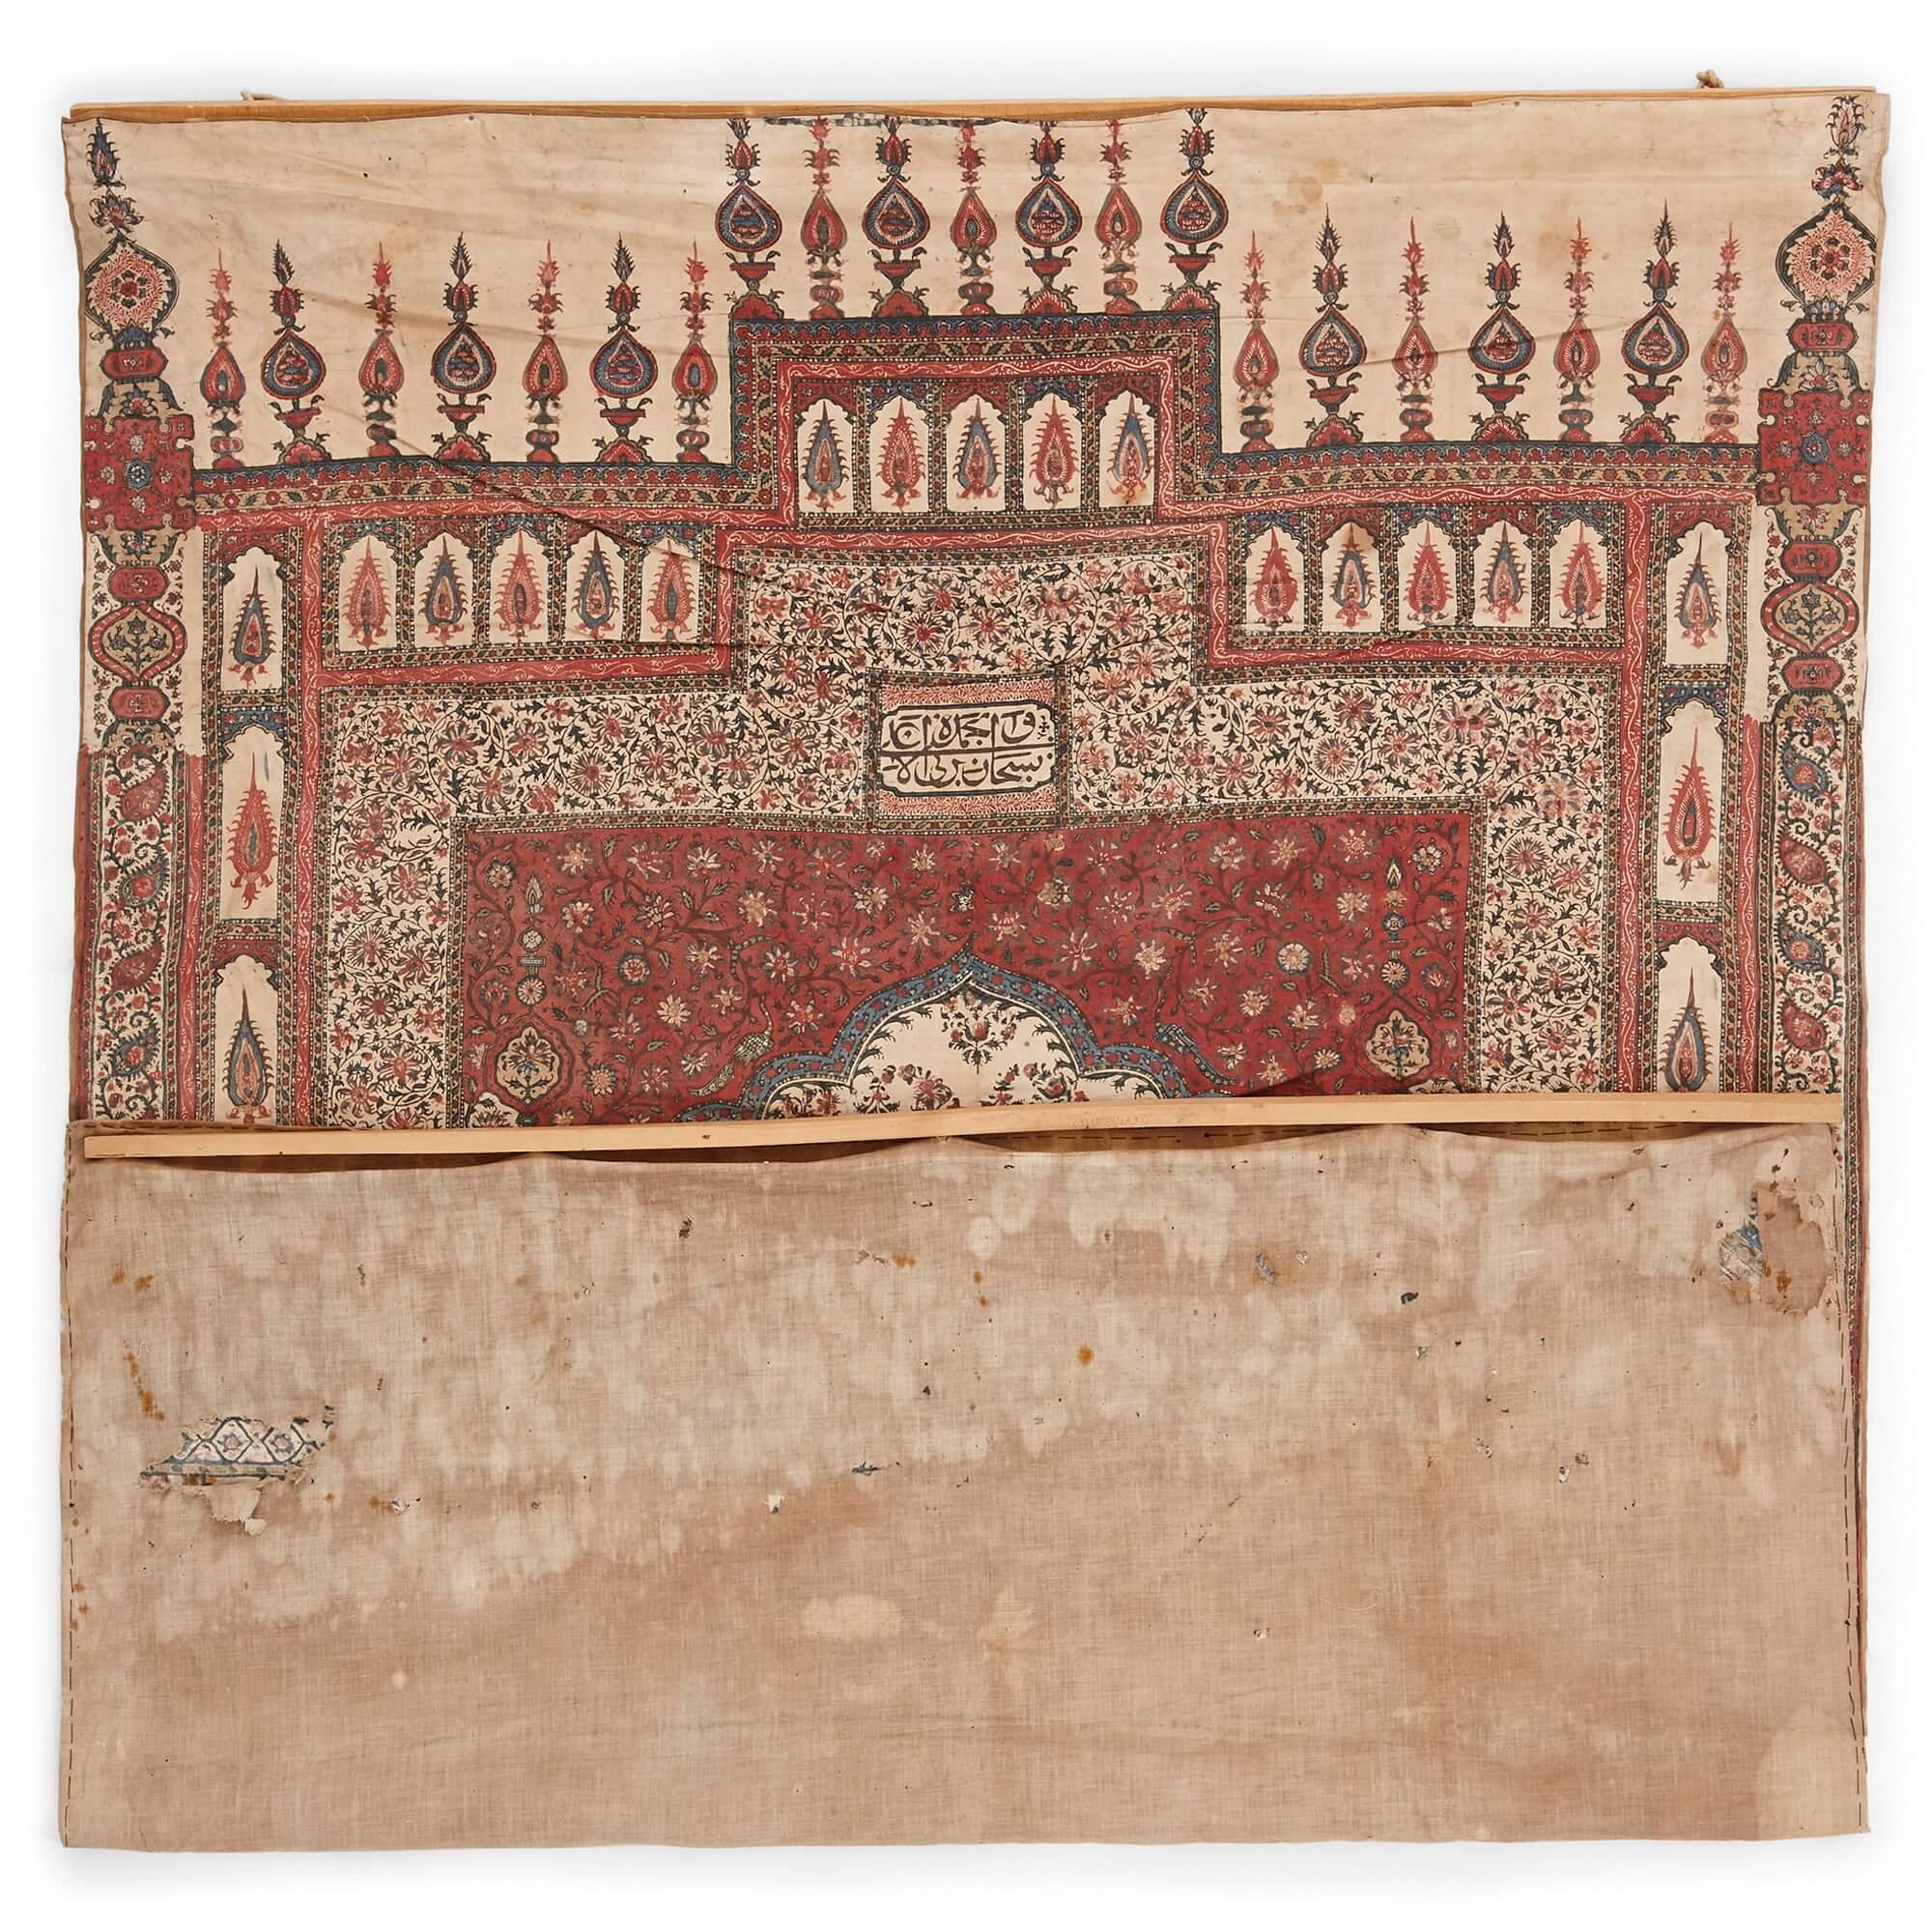 Antique Iranian Kalamkari prayer mat
Persian, Late 19th Century 
Height 128cm, width 92cm

Crafted in the late 19th century by skilled Iranian craftsmen, this cotton prayer mat features a plethora of religious and nature-inspired motifs. 

Its